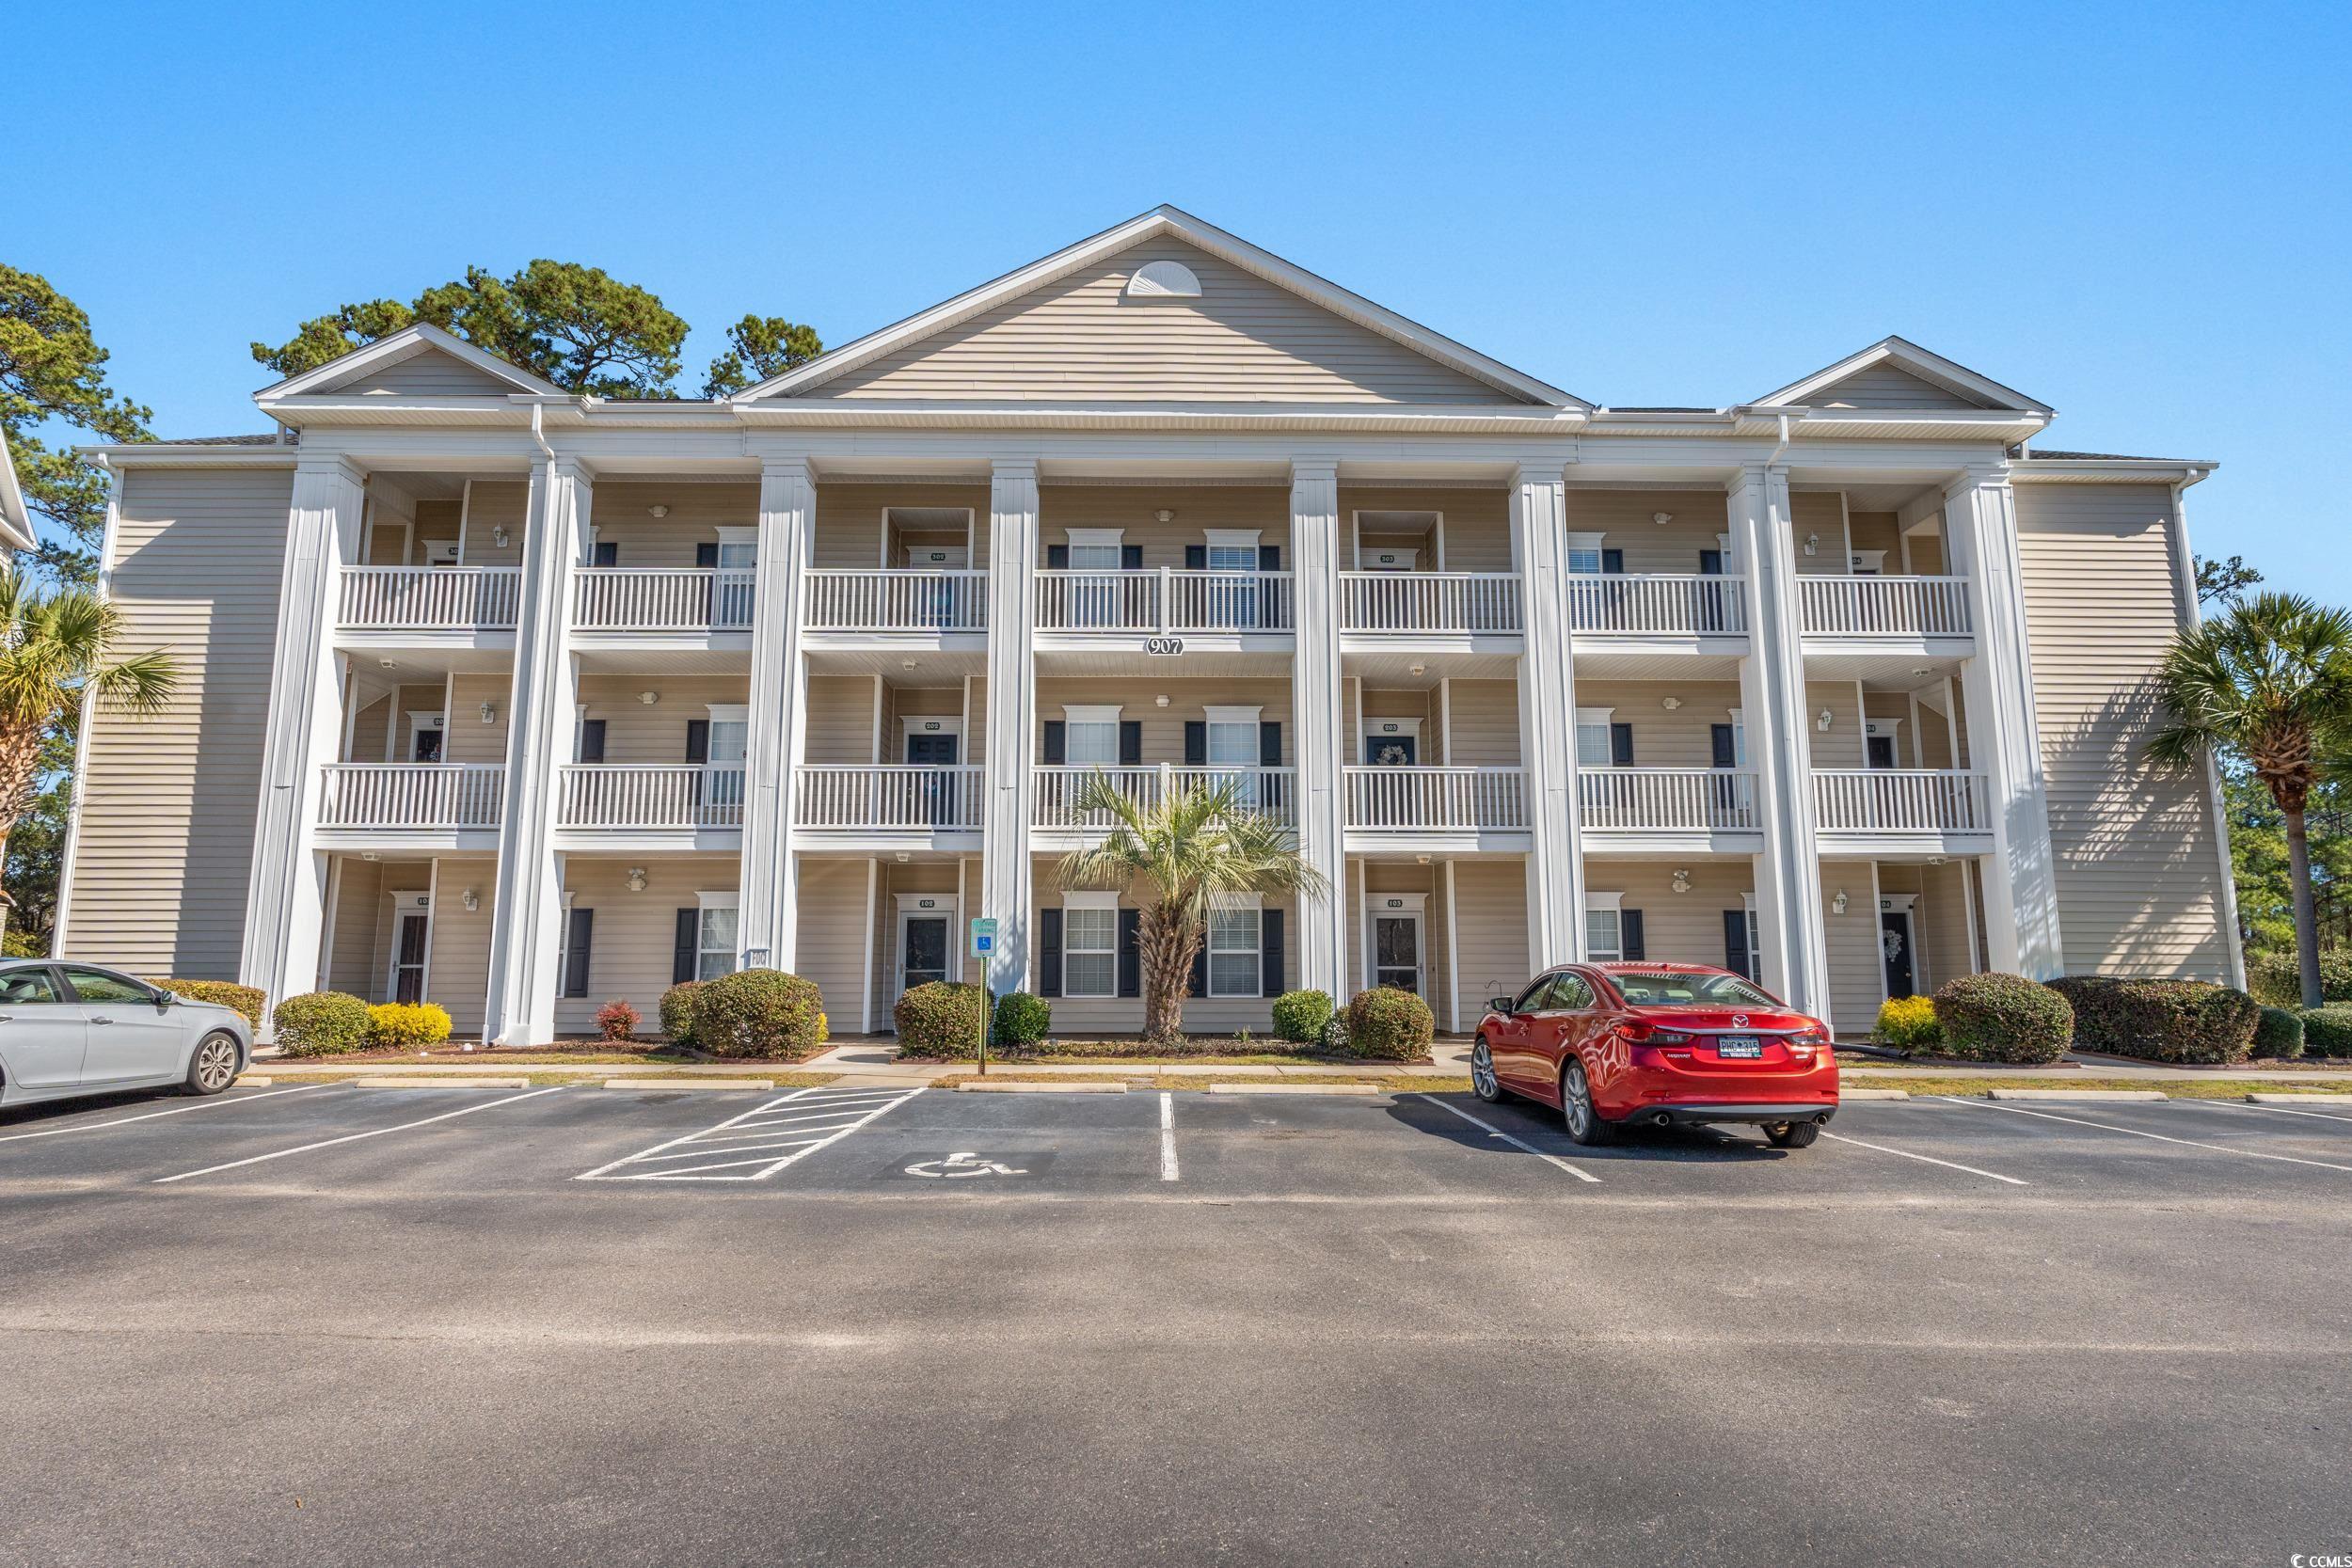 nestled in the beautiful international club of myrtle beach, this beautiful partially furnished, end unit, 2-bedroom, 2-bathroom condo offers breathtaking views of the 13th green. this spacious home features an open floor plan with vaulted ceilings and large windows that provide plenty of natural light. the kitchen is equipped with new stainless steel appliances, and a breakfast bar. the master suite boasts a spacious walk in closet and ensuite bathroom.  the screened in porch is perfect for outdoor entertaining. this unit is located in a gated community. new lvp flooring and paint, hvac was replaced in 2022, water heater in 2021 and roof in 2020.